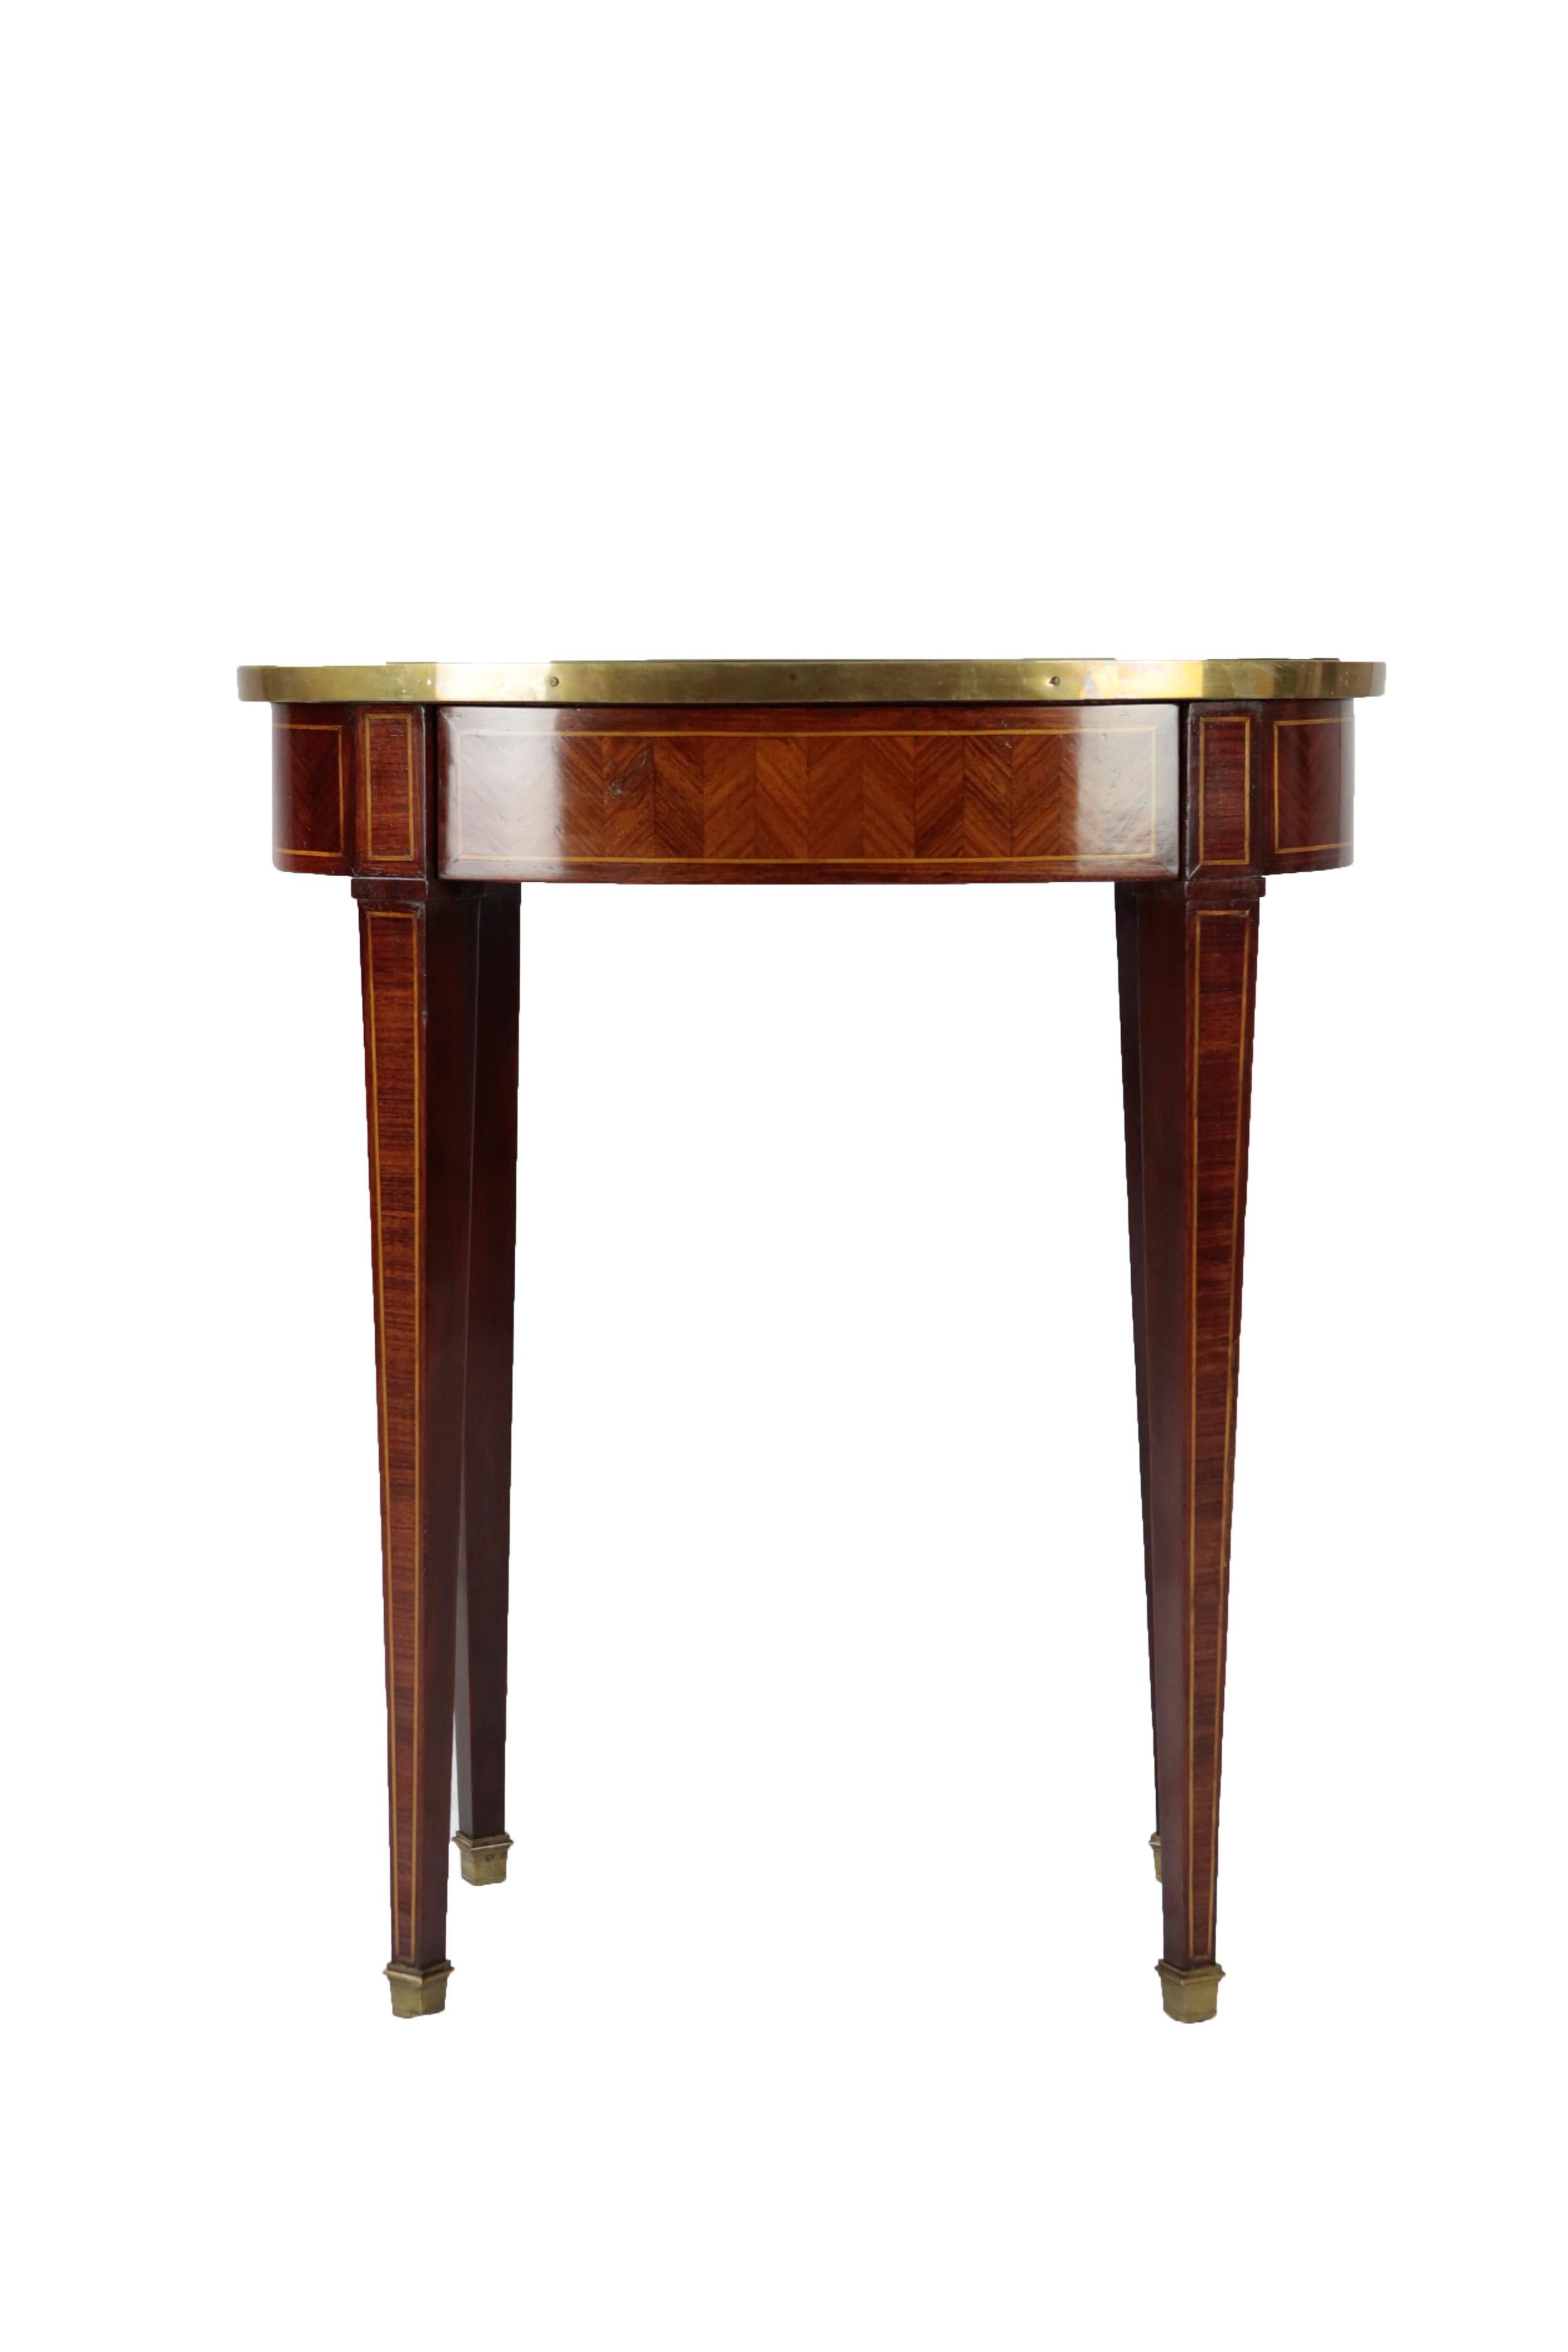 • Late 19th century side table
• France, circa 1880
• Rosewood veneered 
• 1 Drawer
• Restored residential-ready state
• French shellac hand polish
• Measure: Height 70.5 cm, width 61 cm, depth 40.5 cm.








 